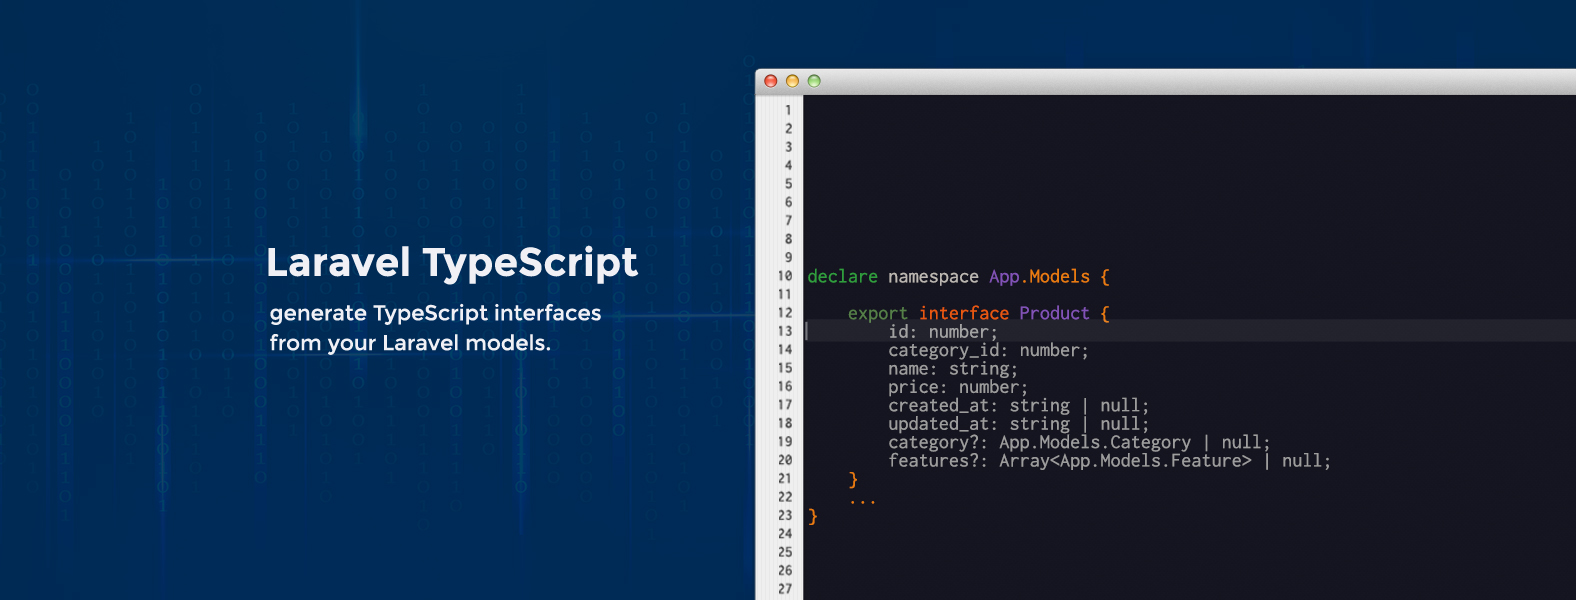 How to Build Typescript Interfaces for Laravel Models